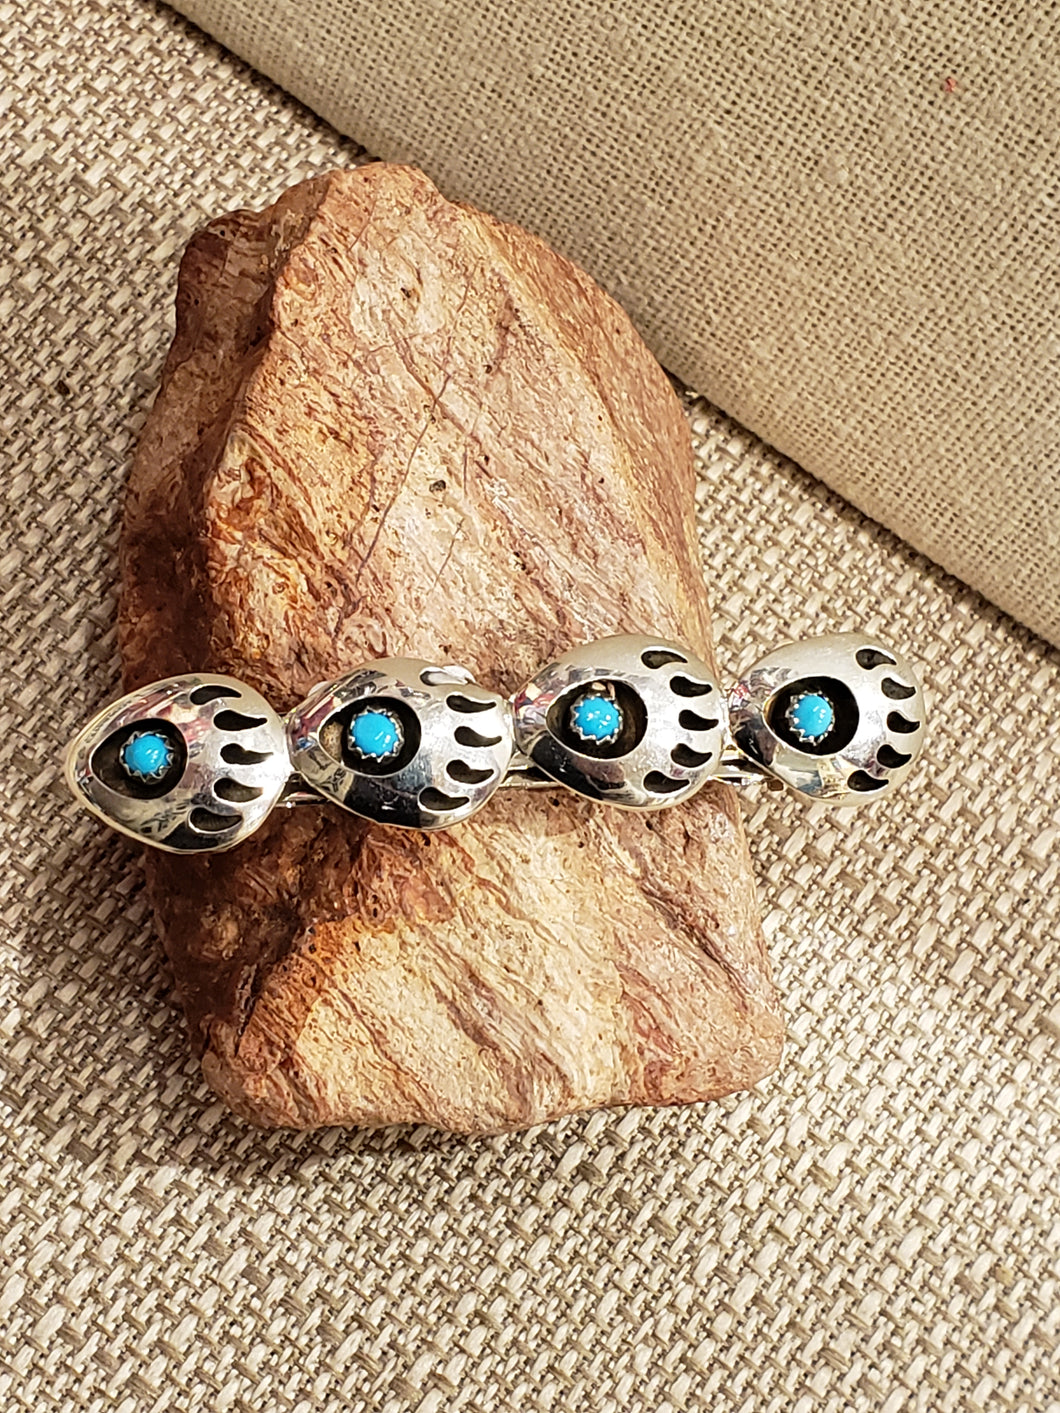 BARRETTE - TURQUOISE BEAR PAW - STERLING